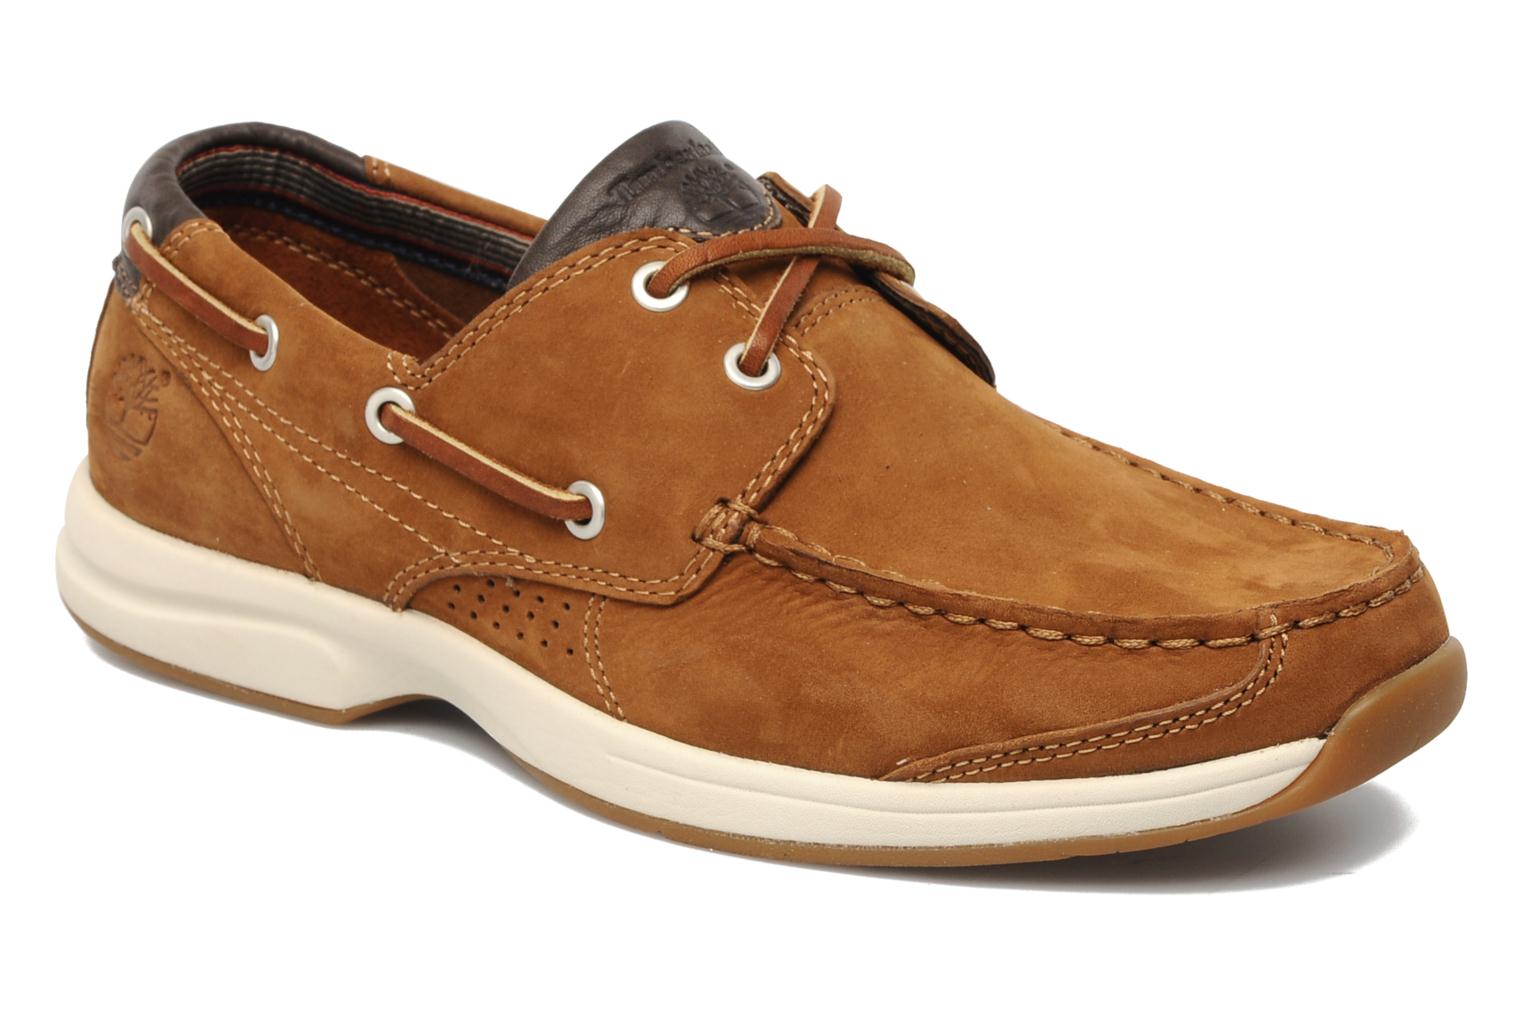 Foto Náuticos Timberland Earthkeepers Hull's Cove 2 Eye Hombre foto 557206